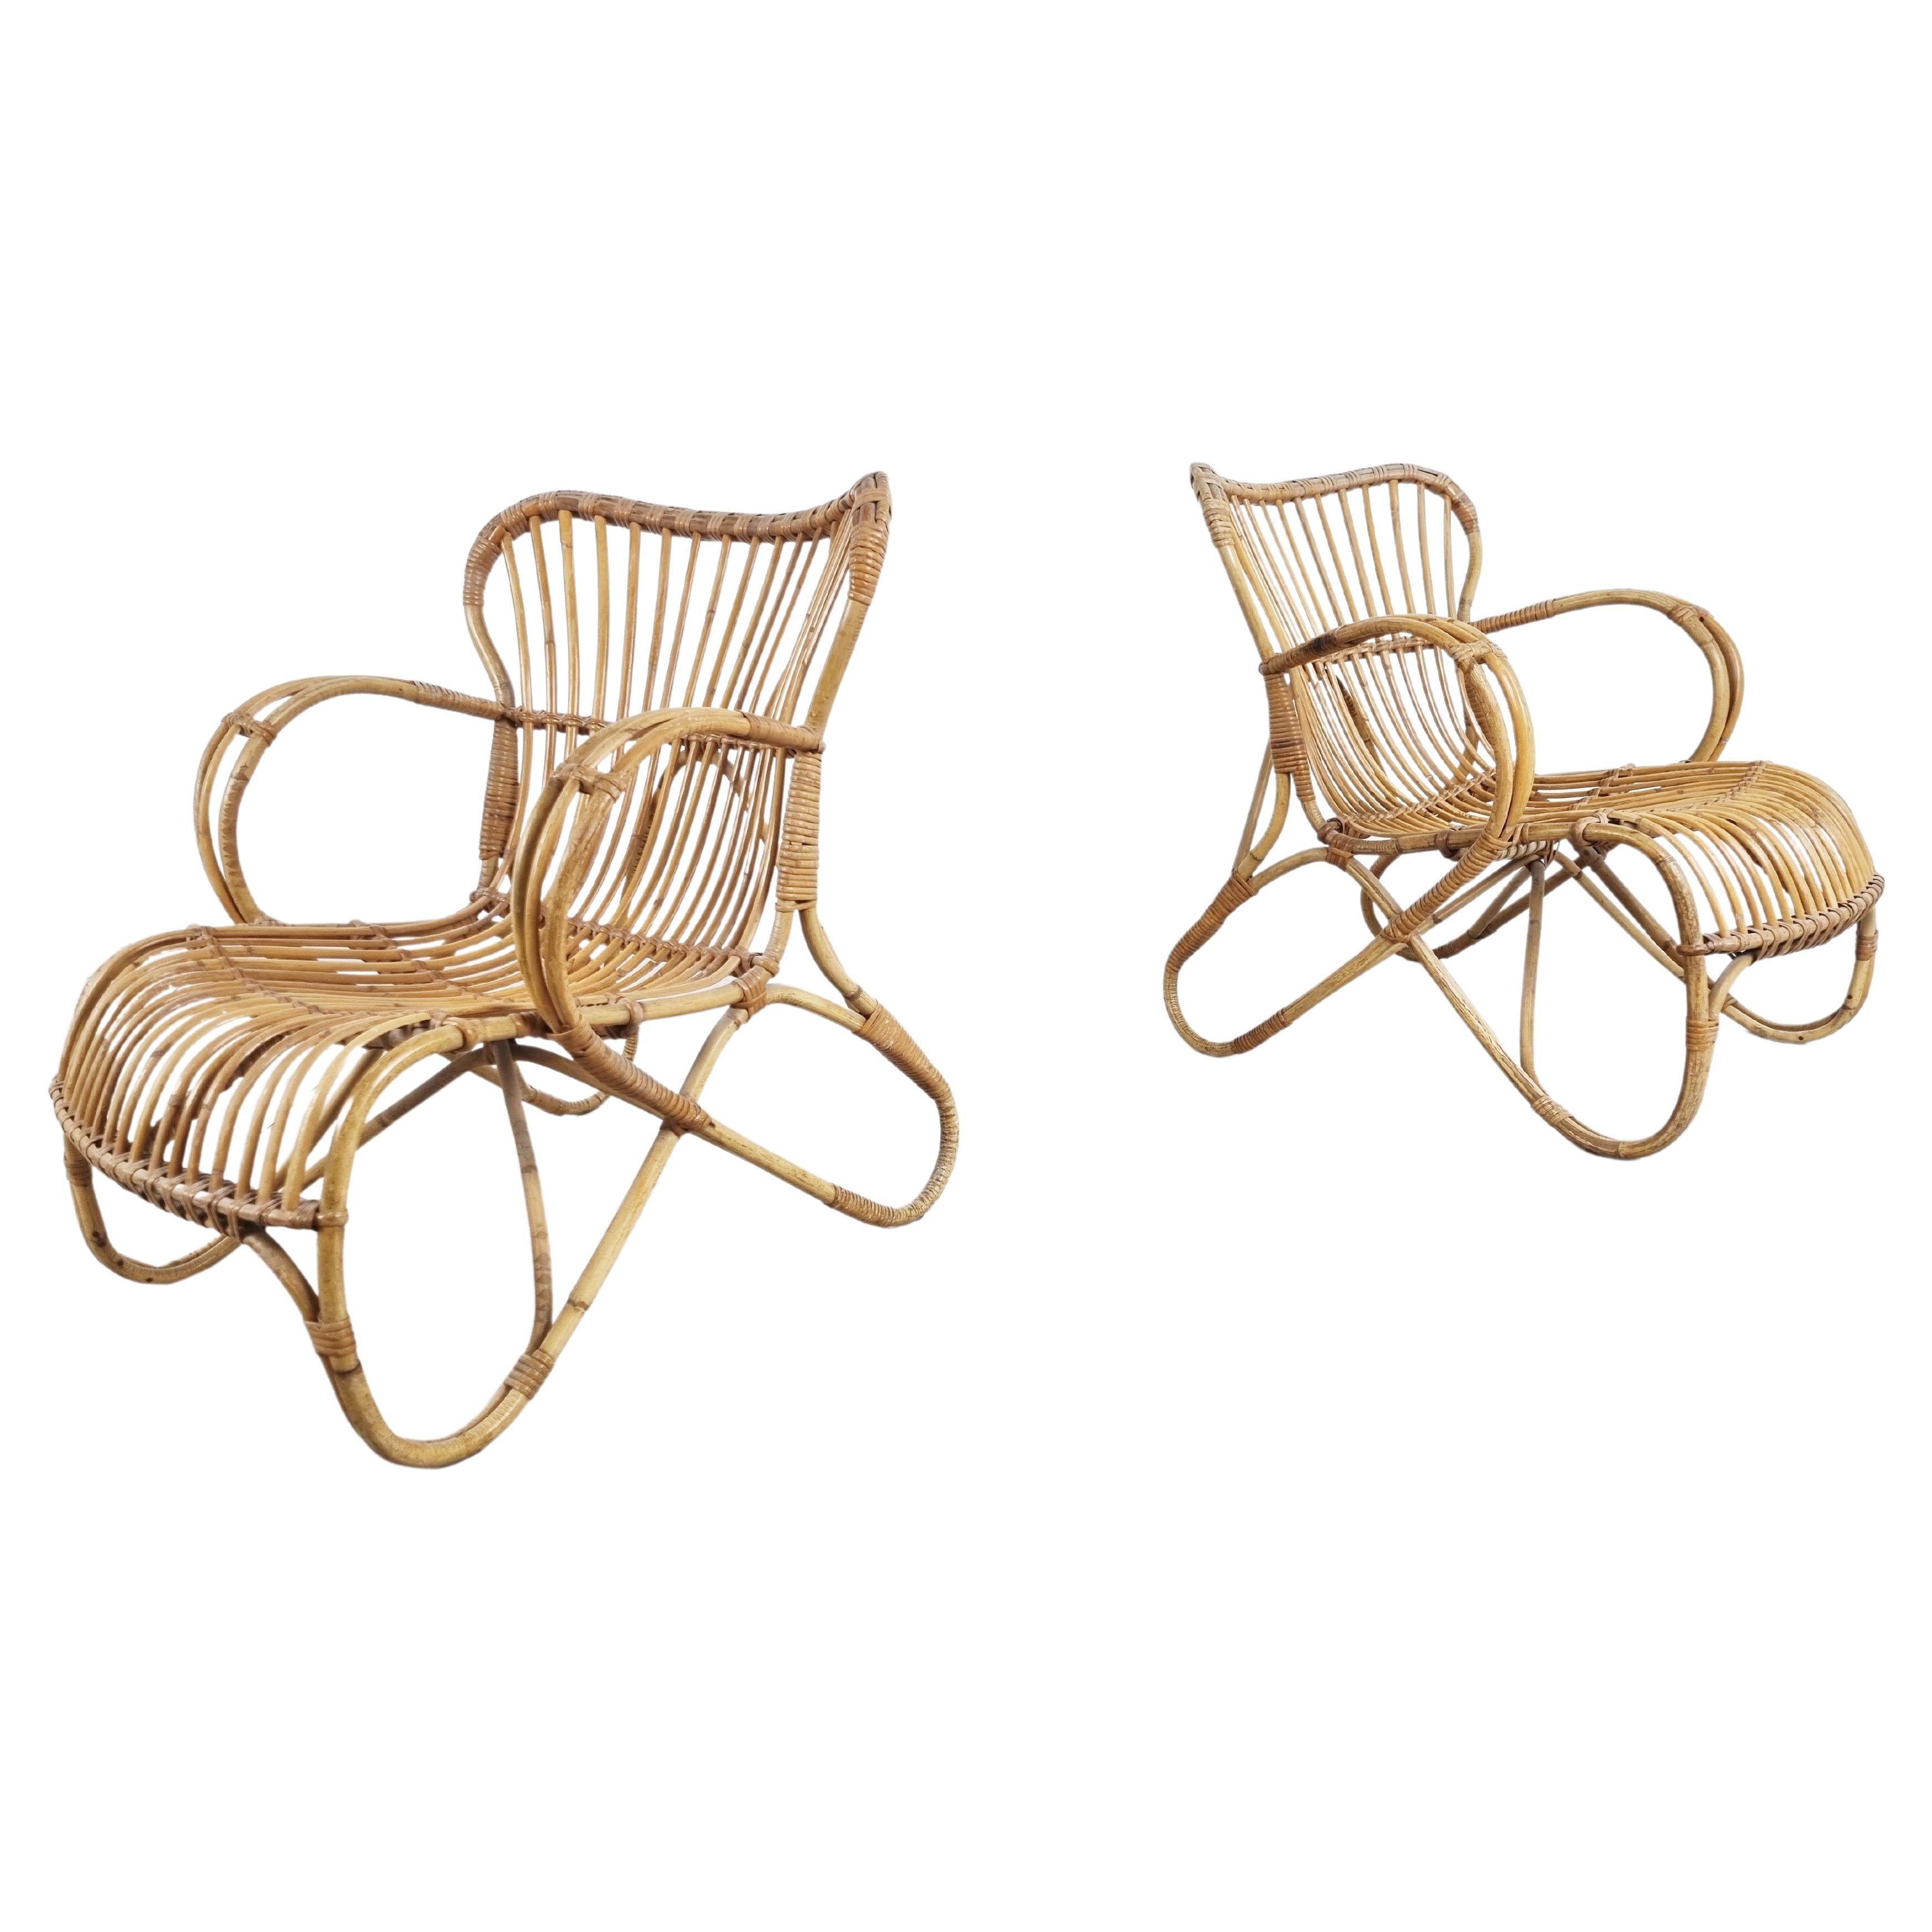 Vintage Bamboo Lounge Chairs, Set of 2 - 1960s 